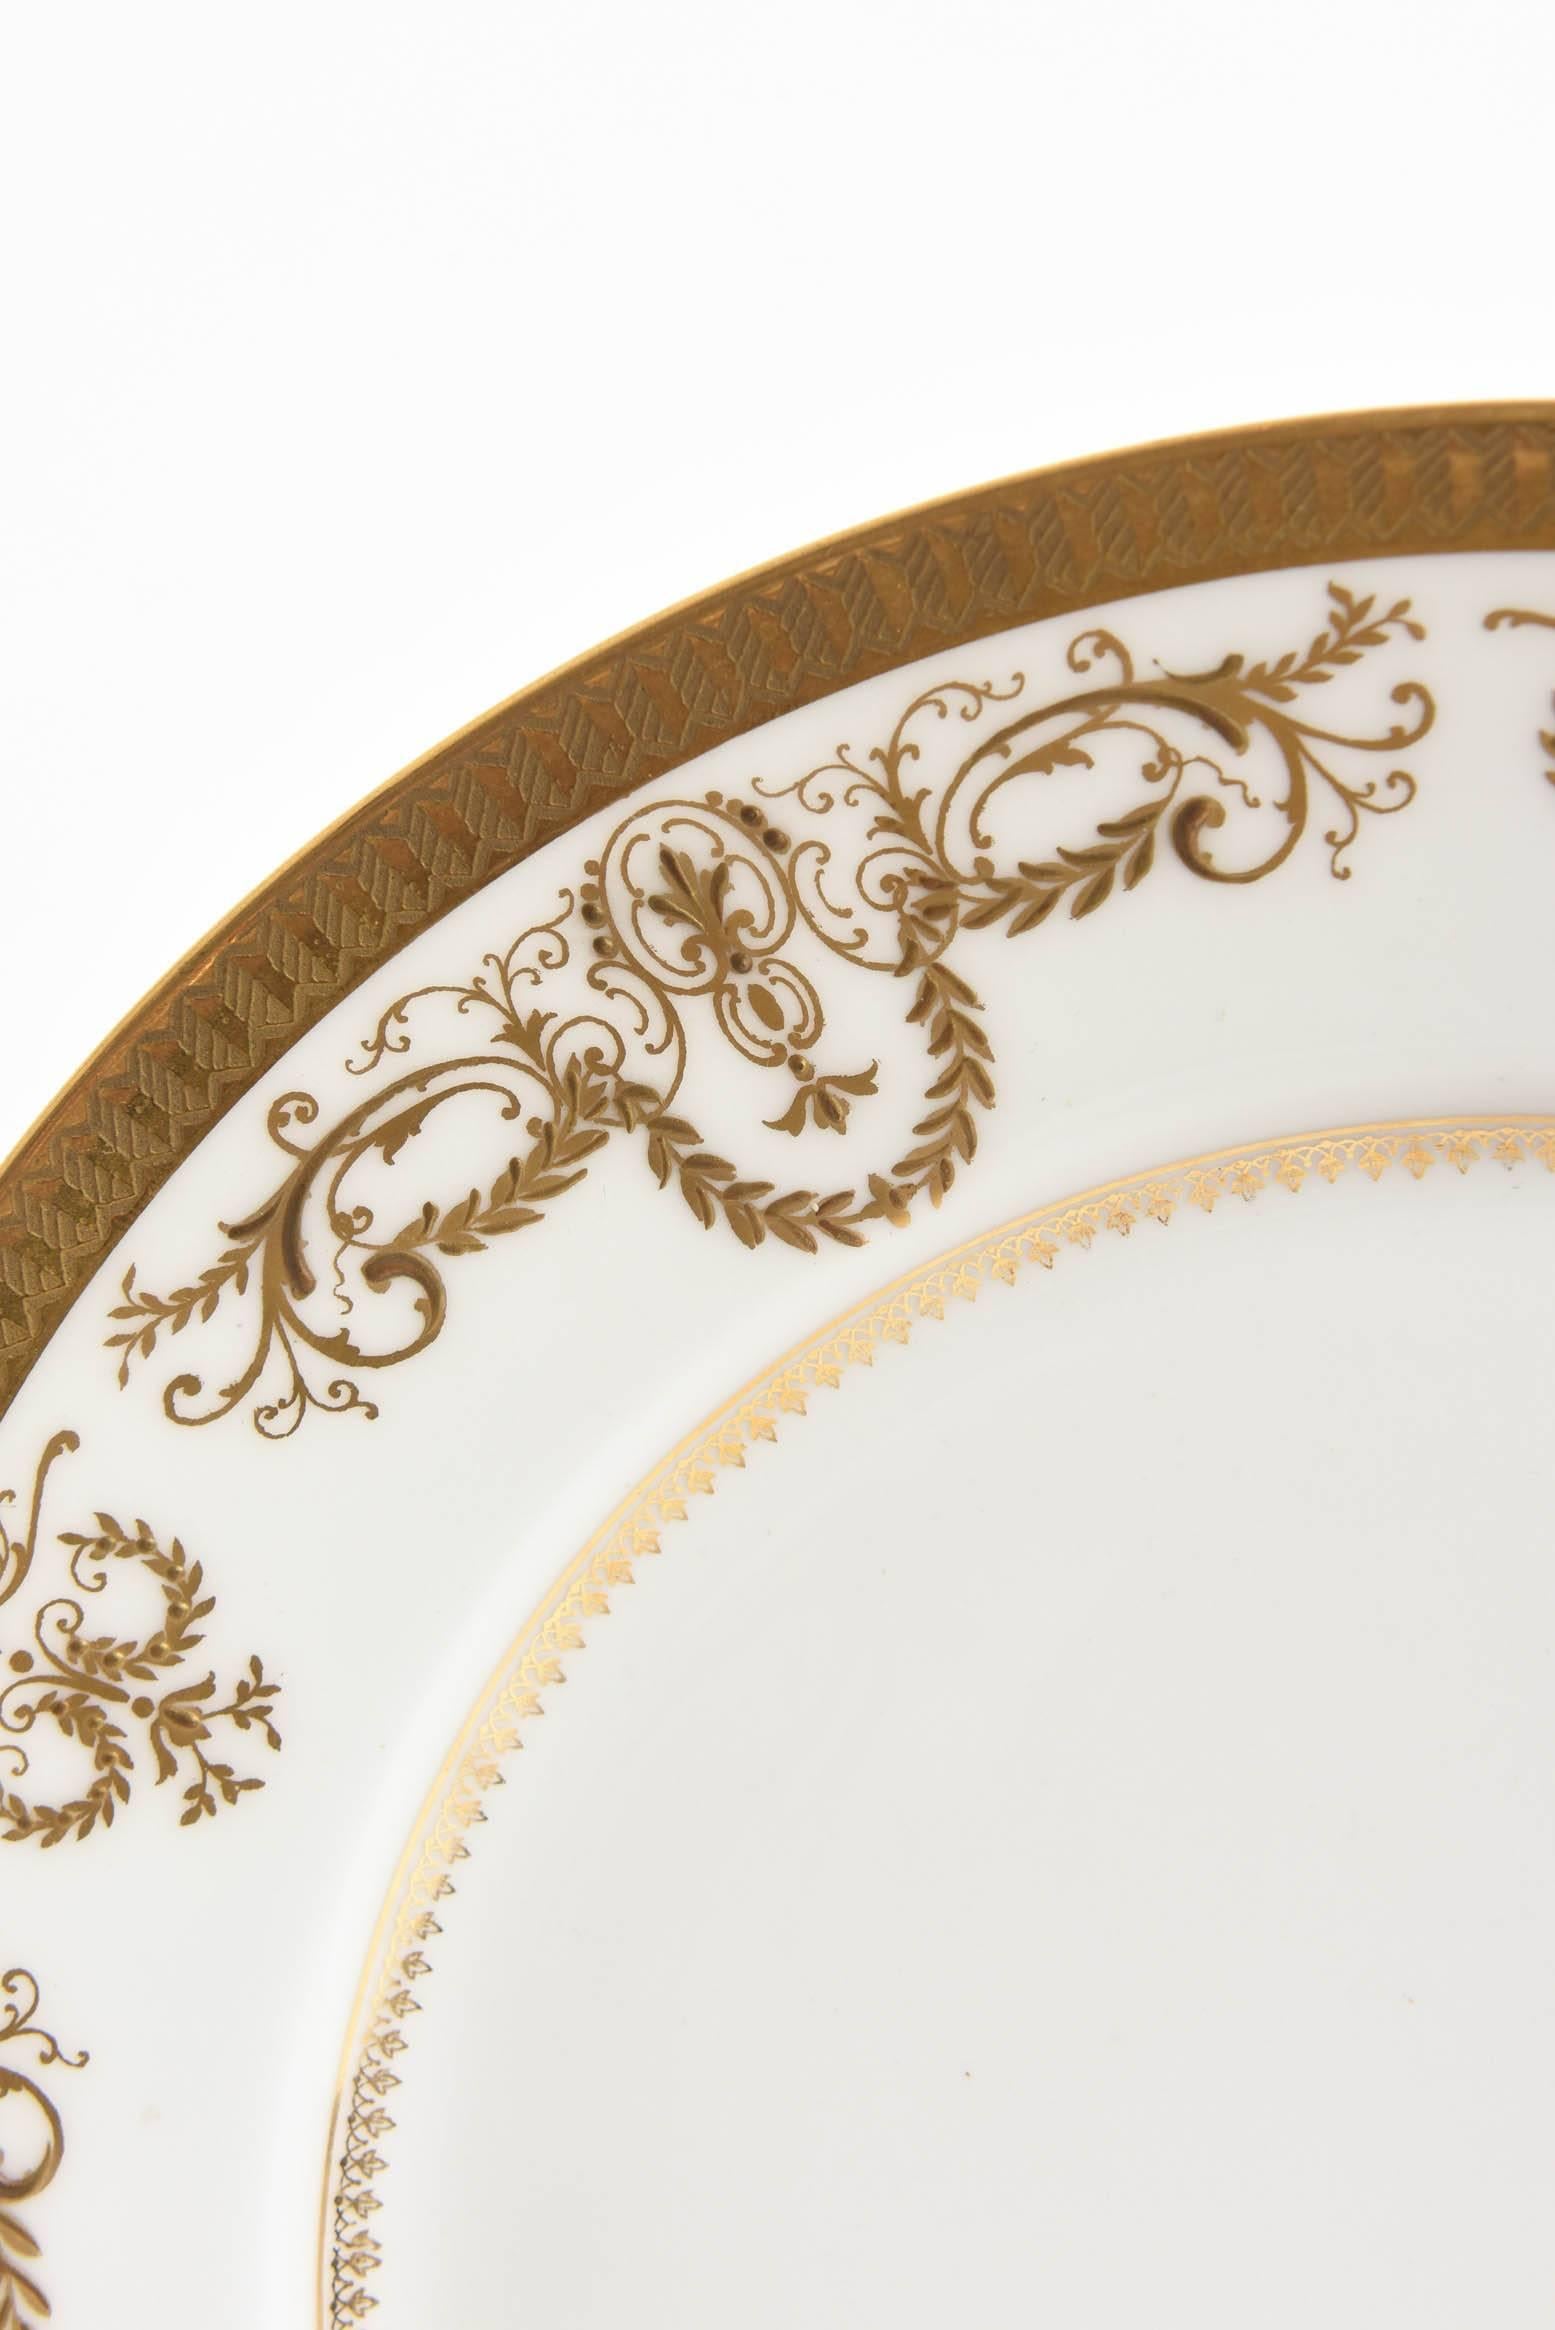 A pretty set of white and gold plates to go with all your fine porcelain tabletop. This set by Limoges has a nice raised tooled gilt foliate border on crisp white porcelain. Perfect size for salads, desserts, first course in very nice antique